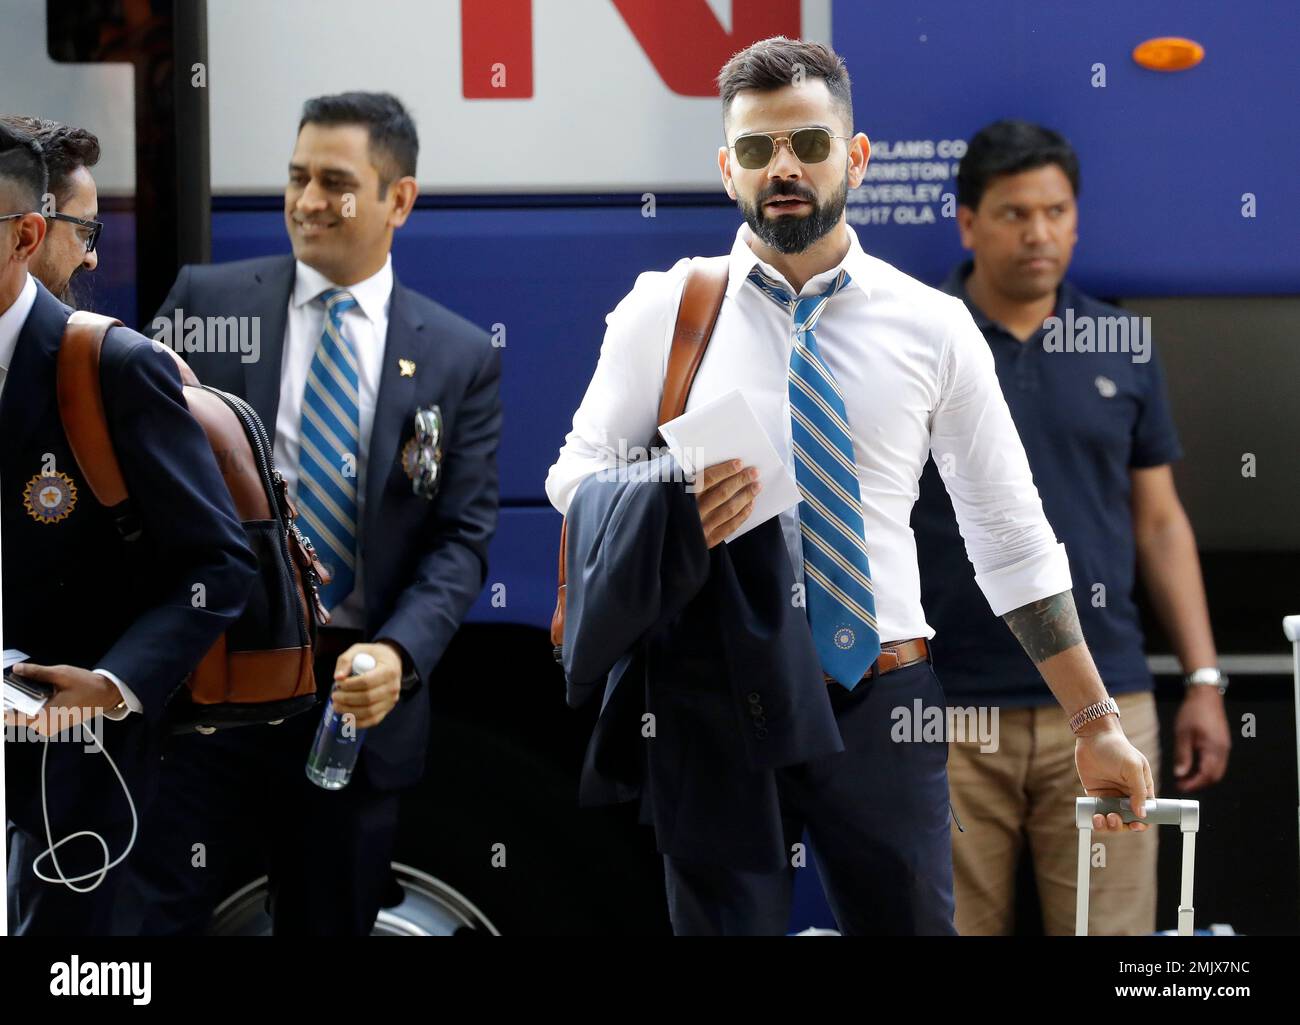 PHOTOS: Kohli with other captains at Champions Trophy opening dinner -  Rediff.com